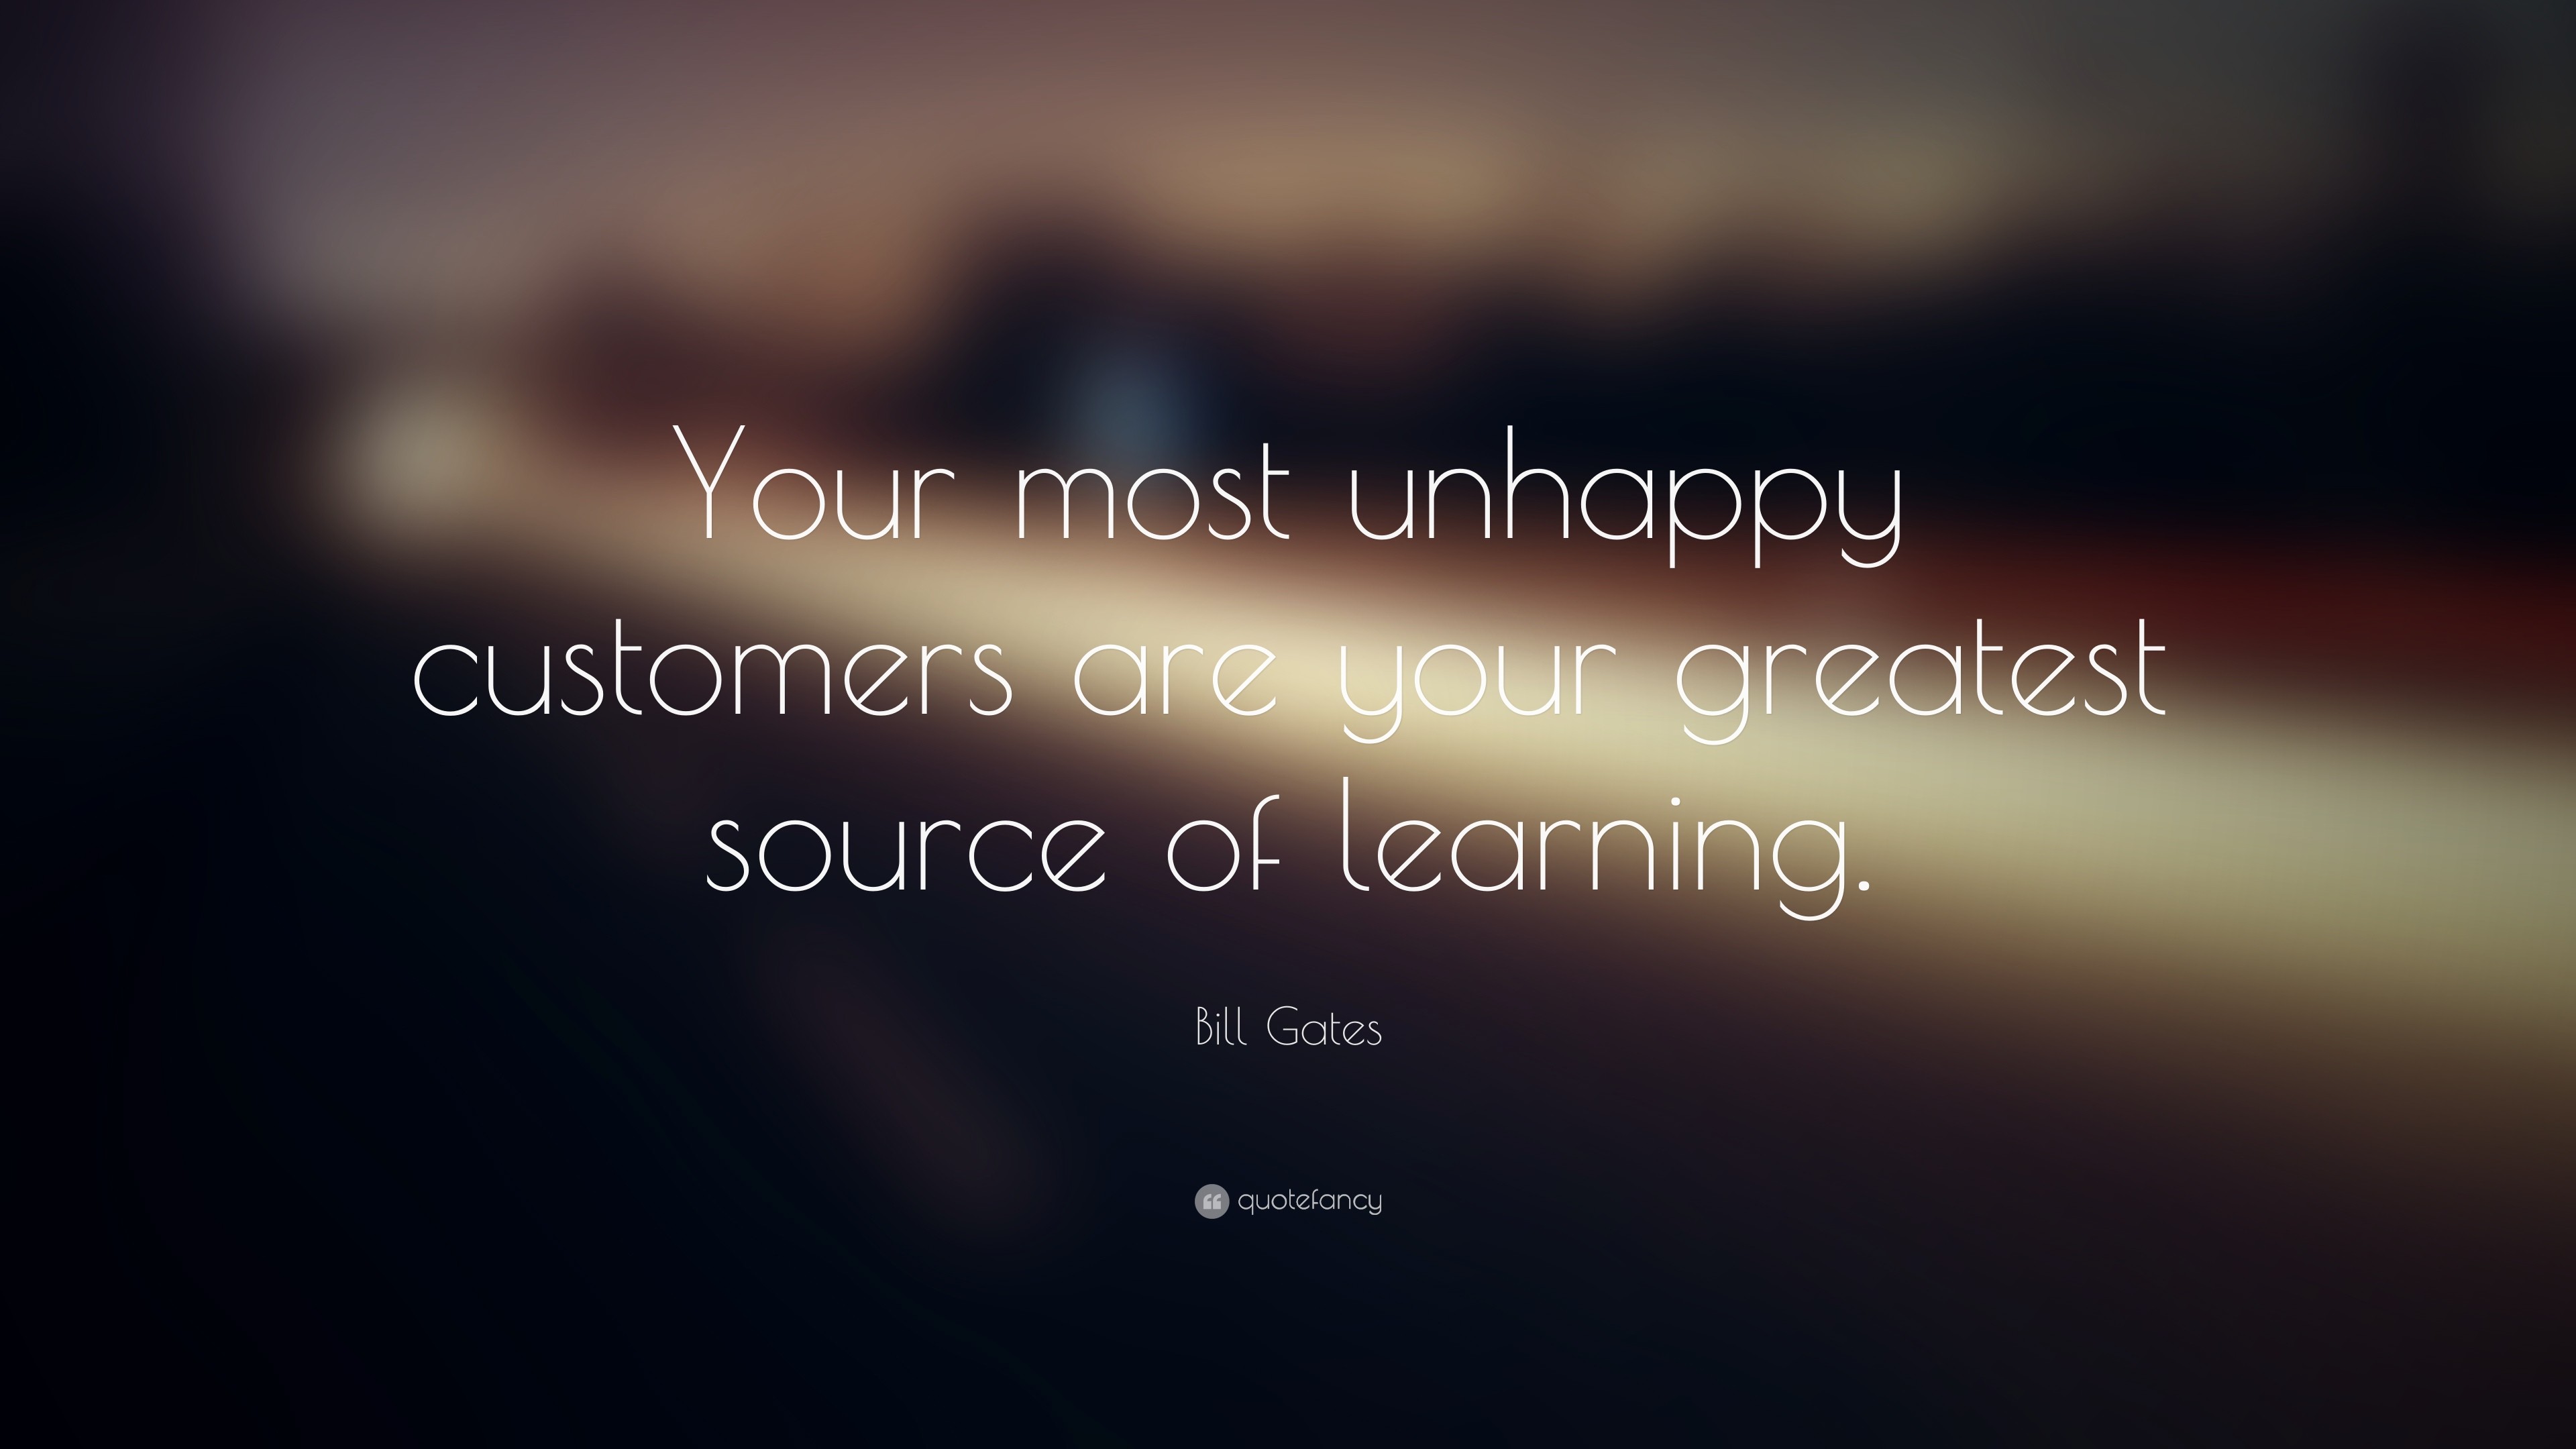 3840x2160 Bill Gates Quote: “Your most unhappy customers are your greatest source of  learning.